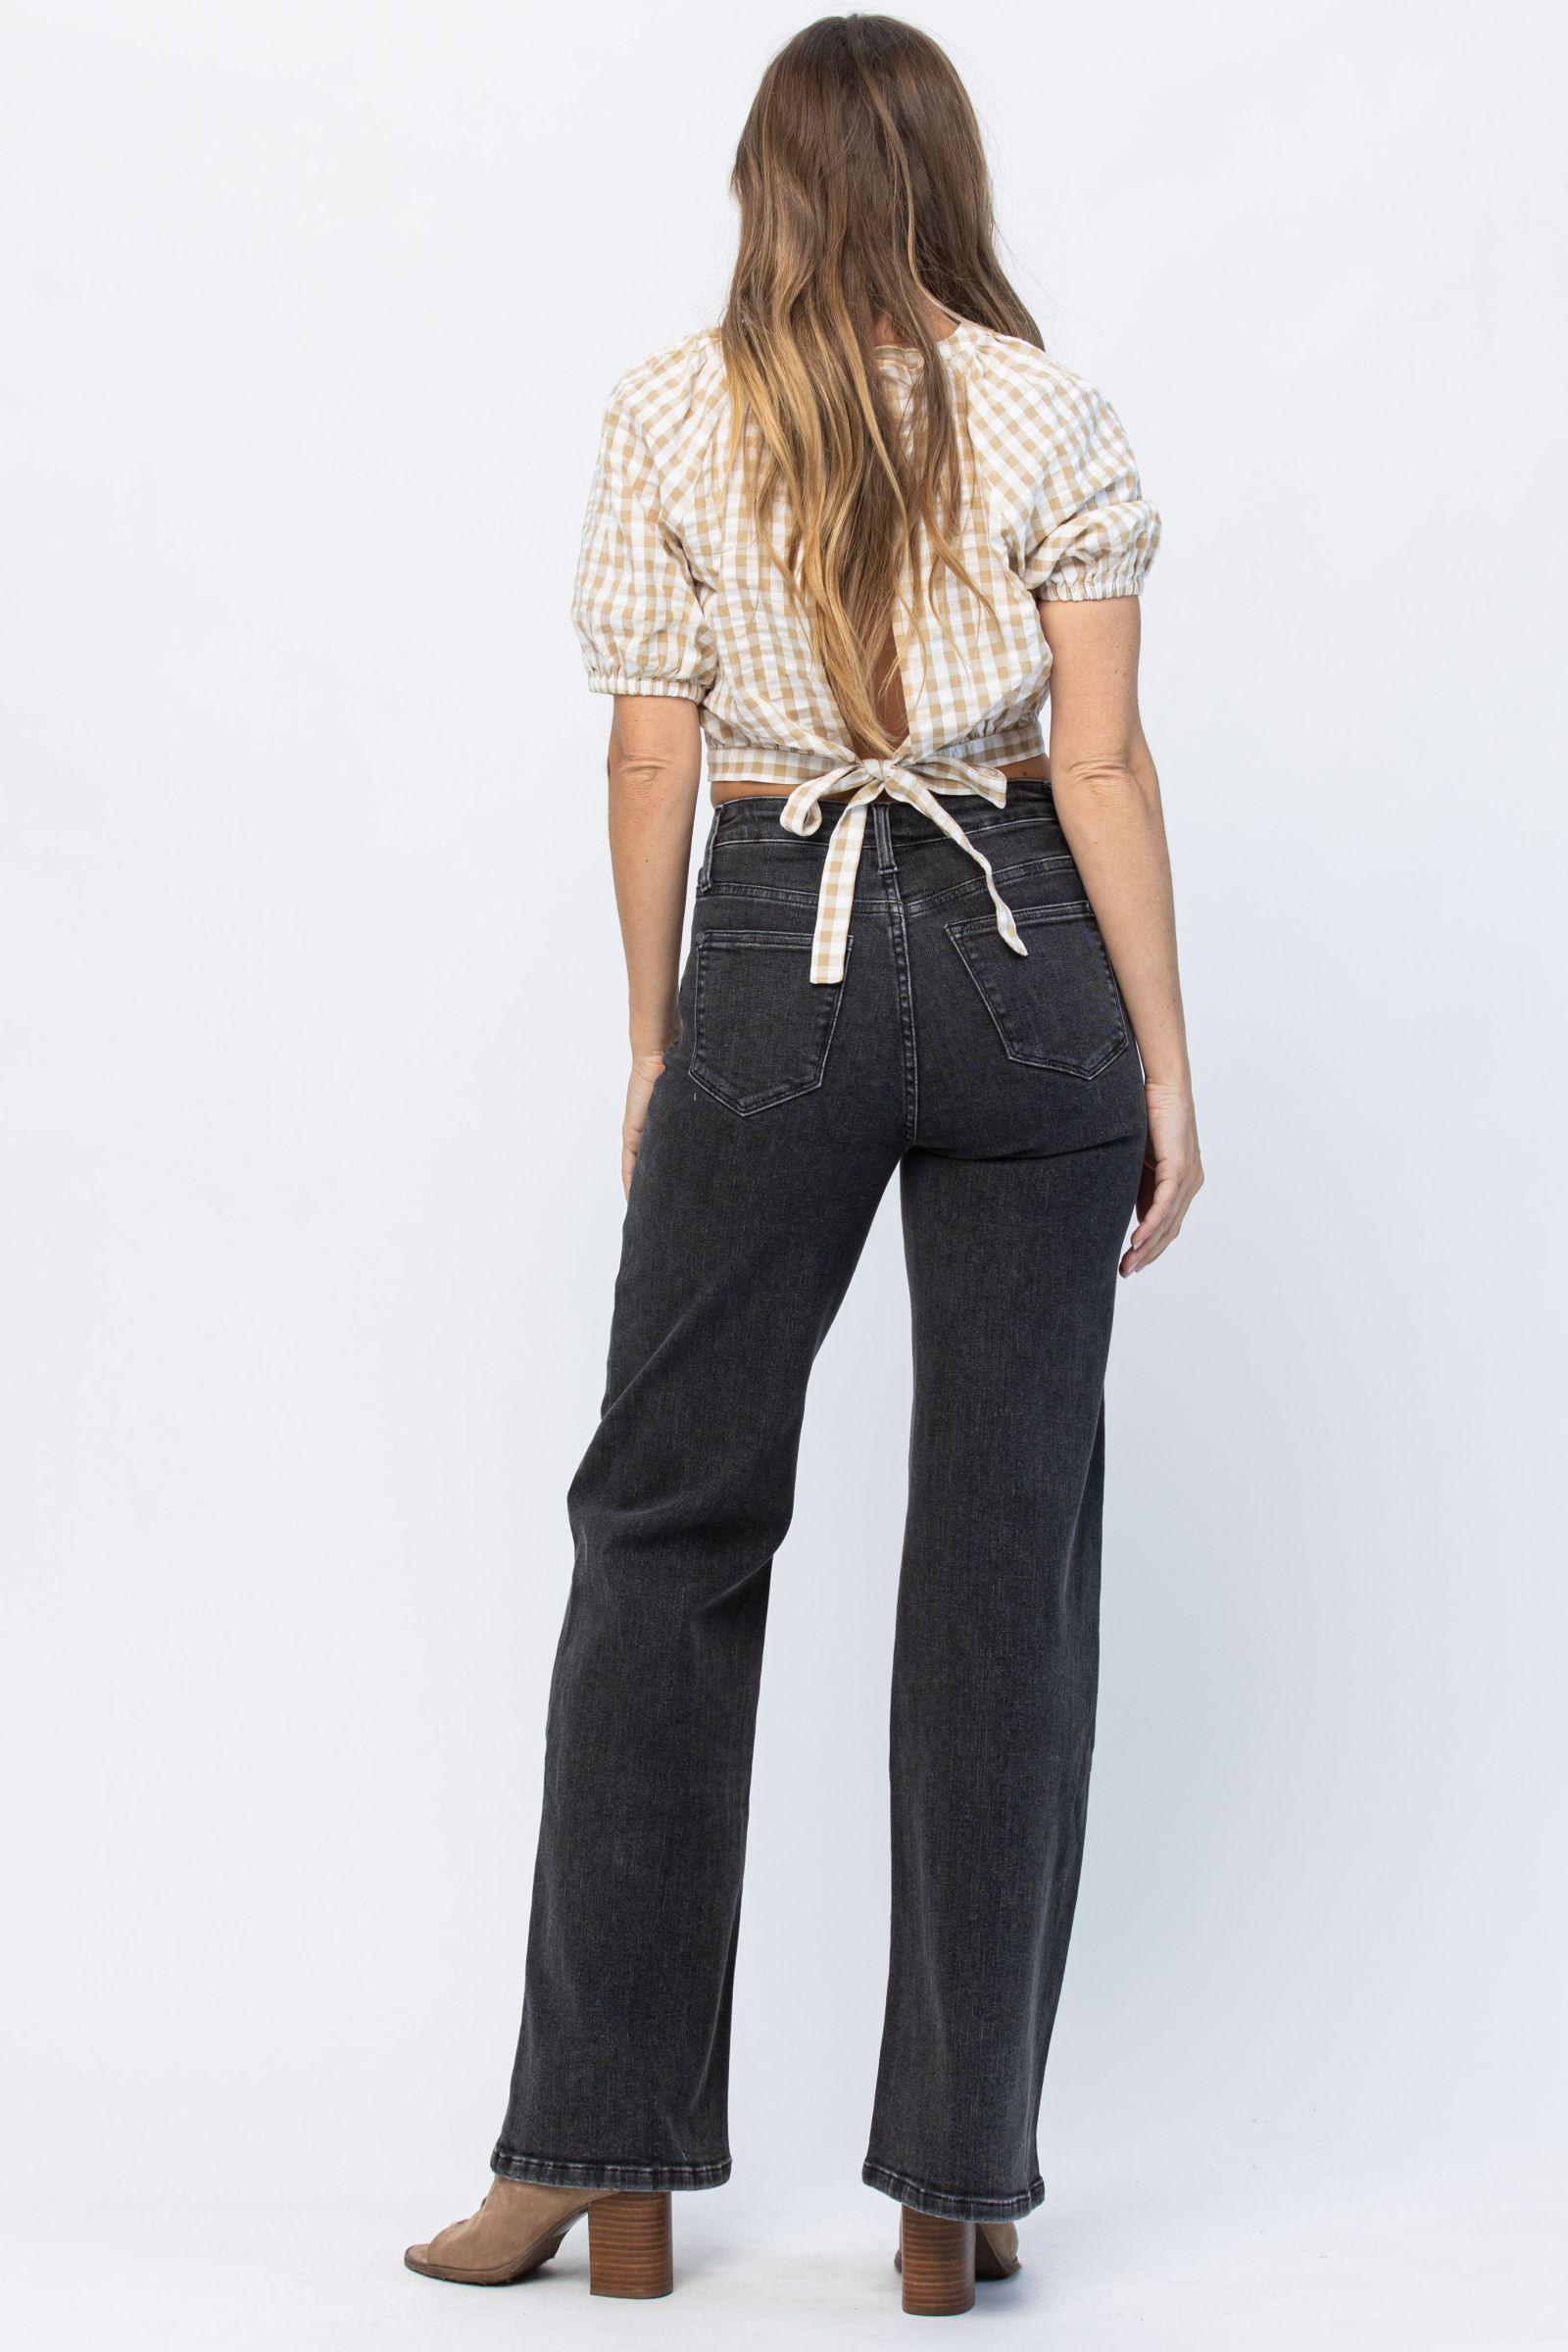 Judy Blue Black Button Fly Trouser Jeans - Strawberry Moon Boutique